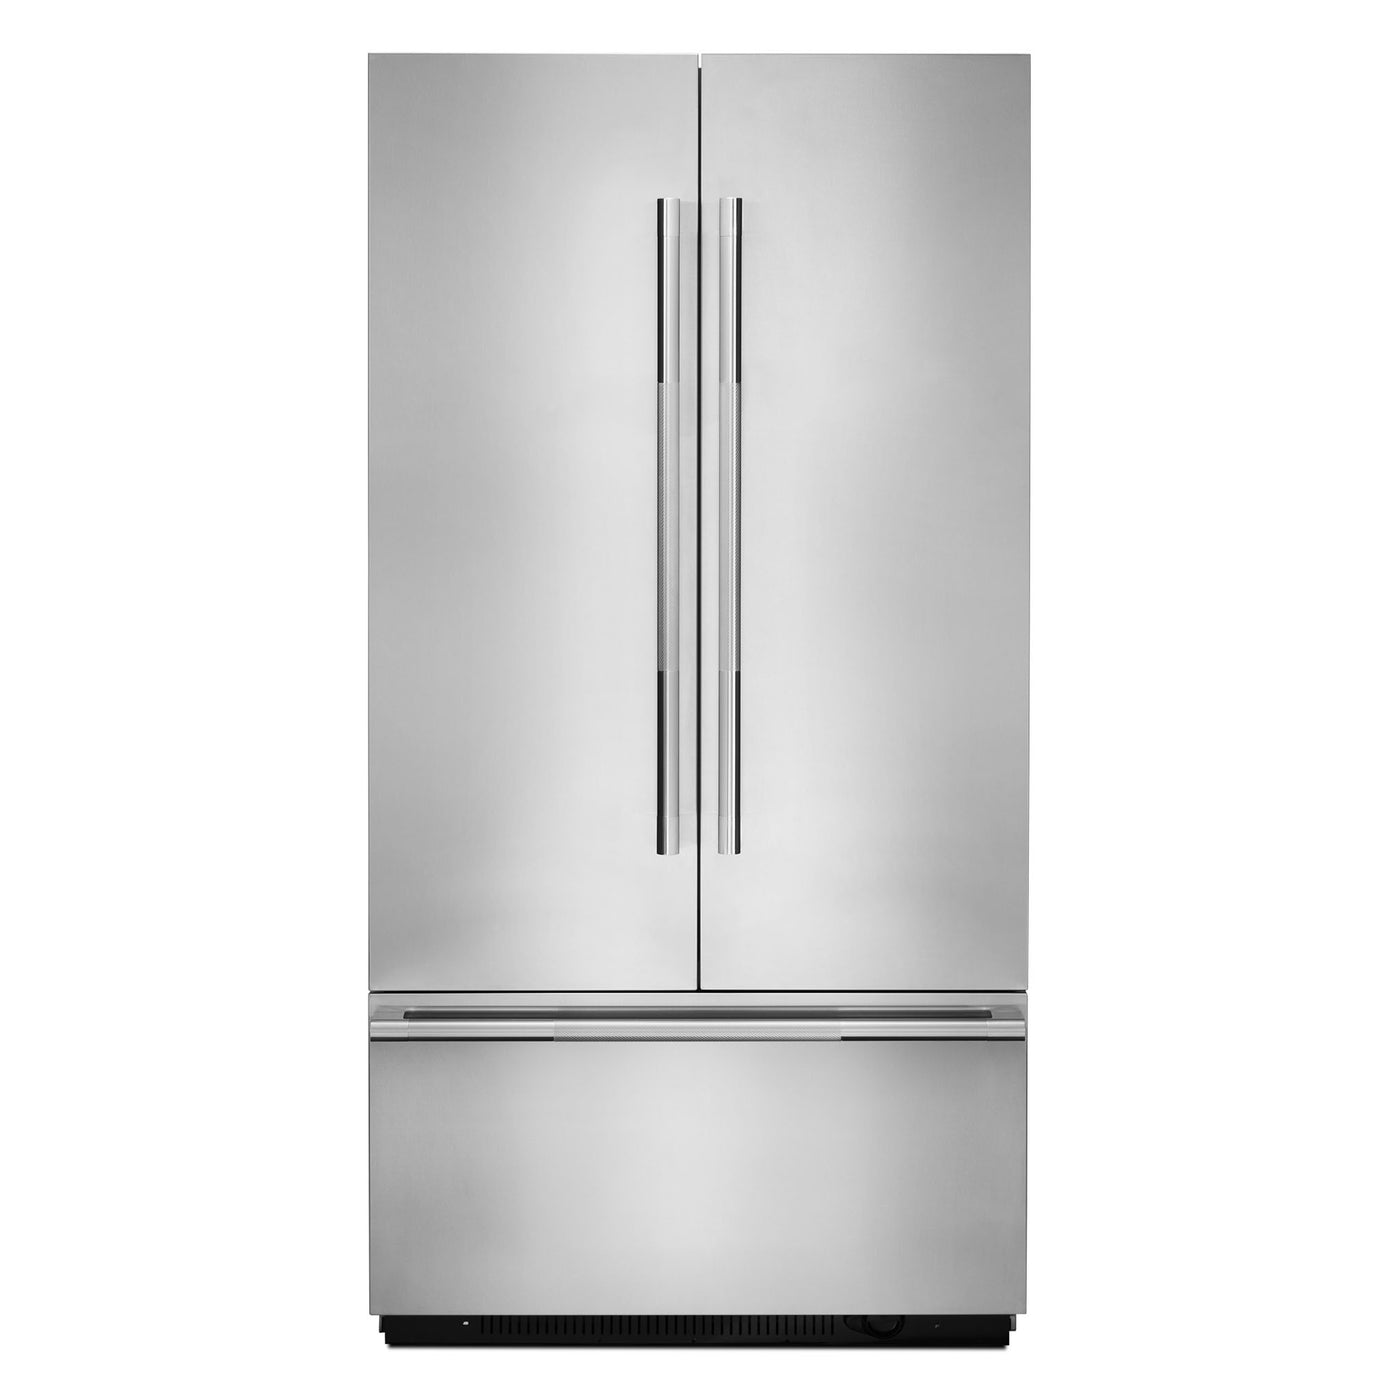 42" Panel-Ready Built-In French Door Refrigerator